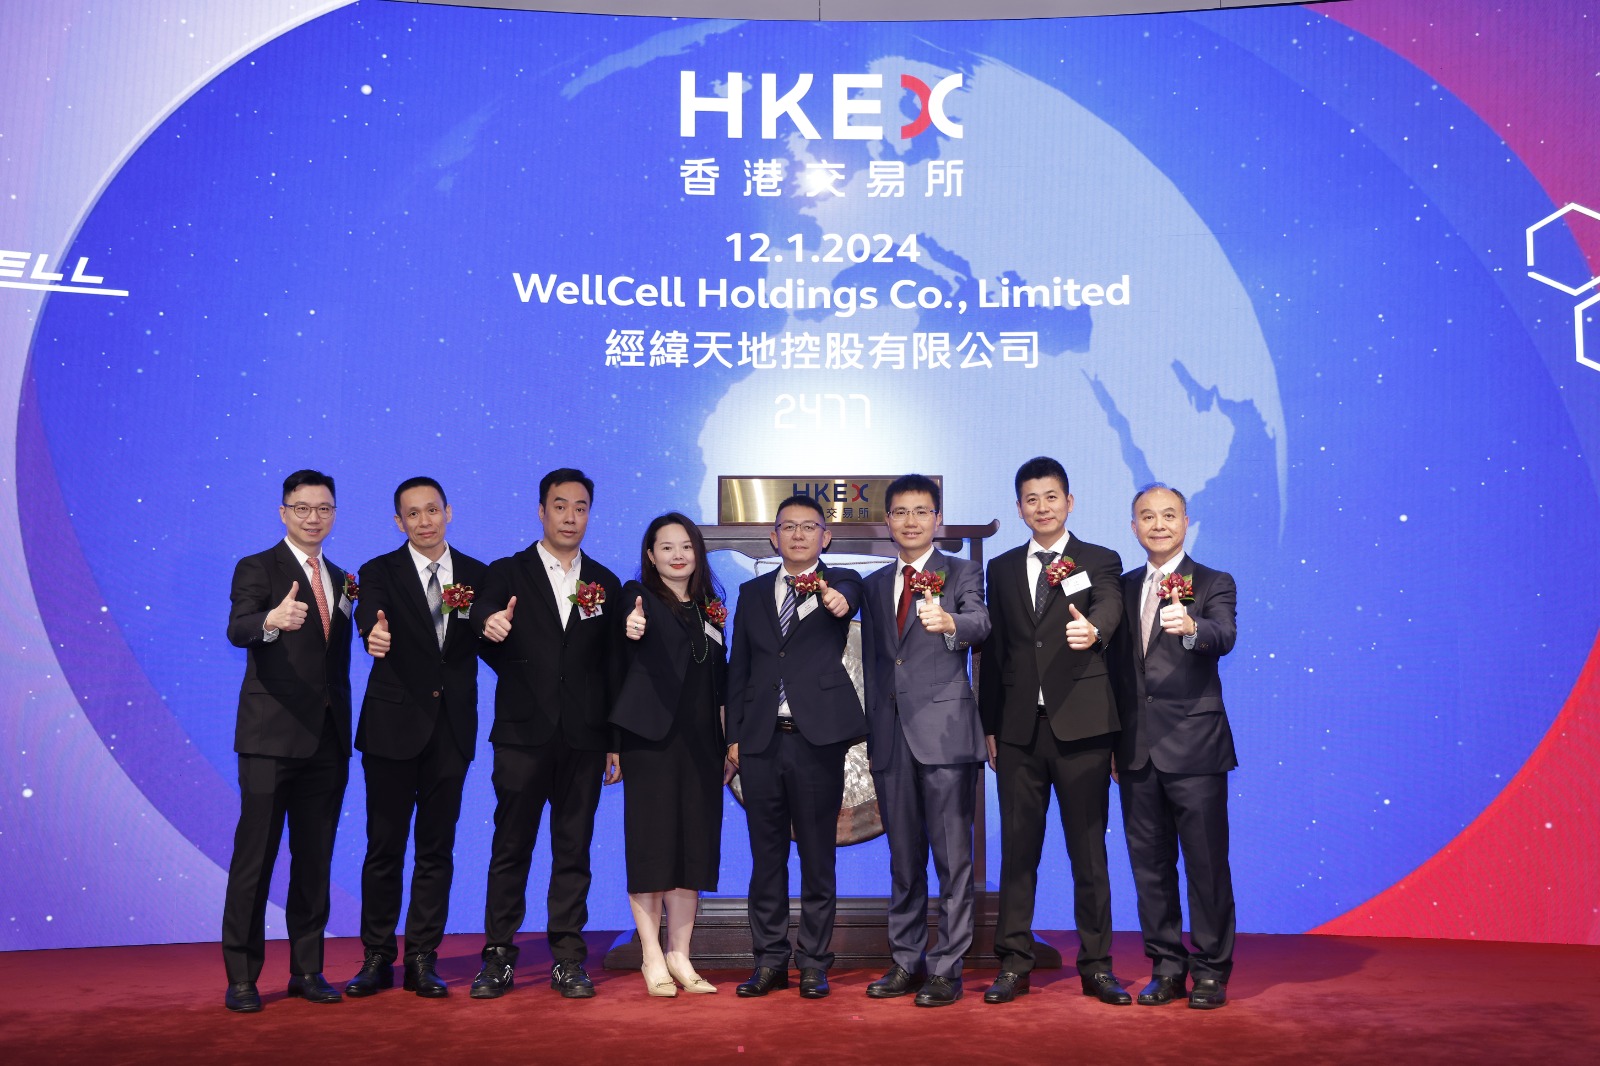 Caption: Mr. Jia Zhengyi, Executive Director, Chairman of the Board and CEO of WellCell (4th from right), Mr. Kang Hong, Deputy Secretary-General of Zhuhai Municipal People